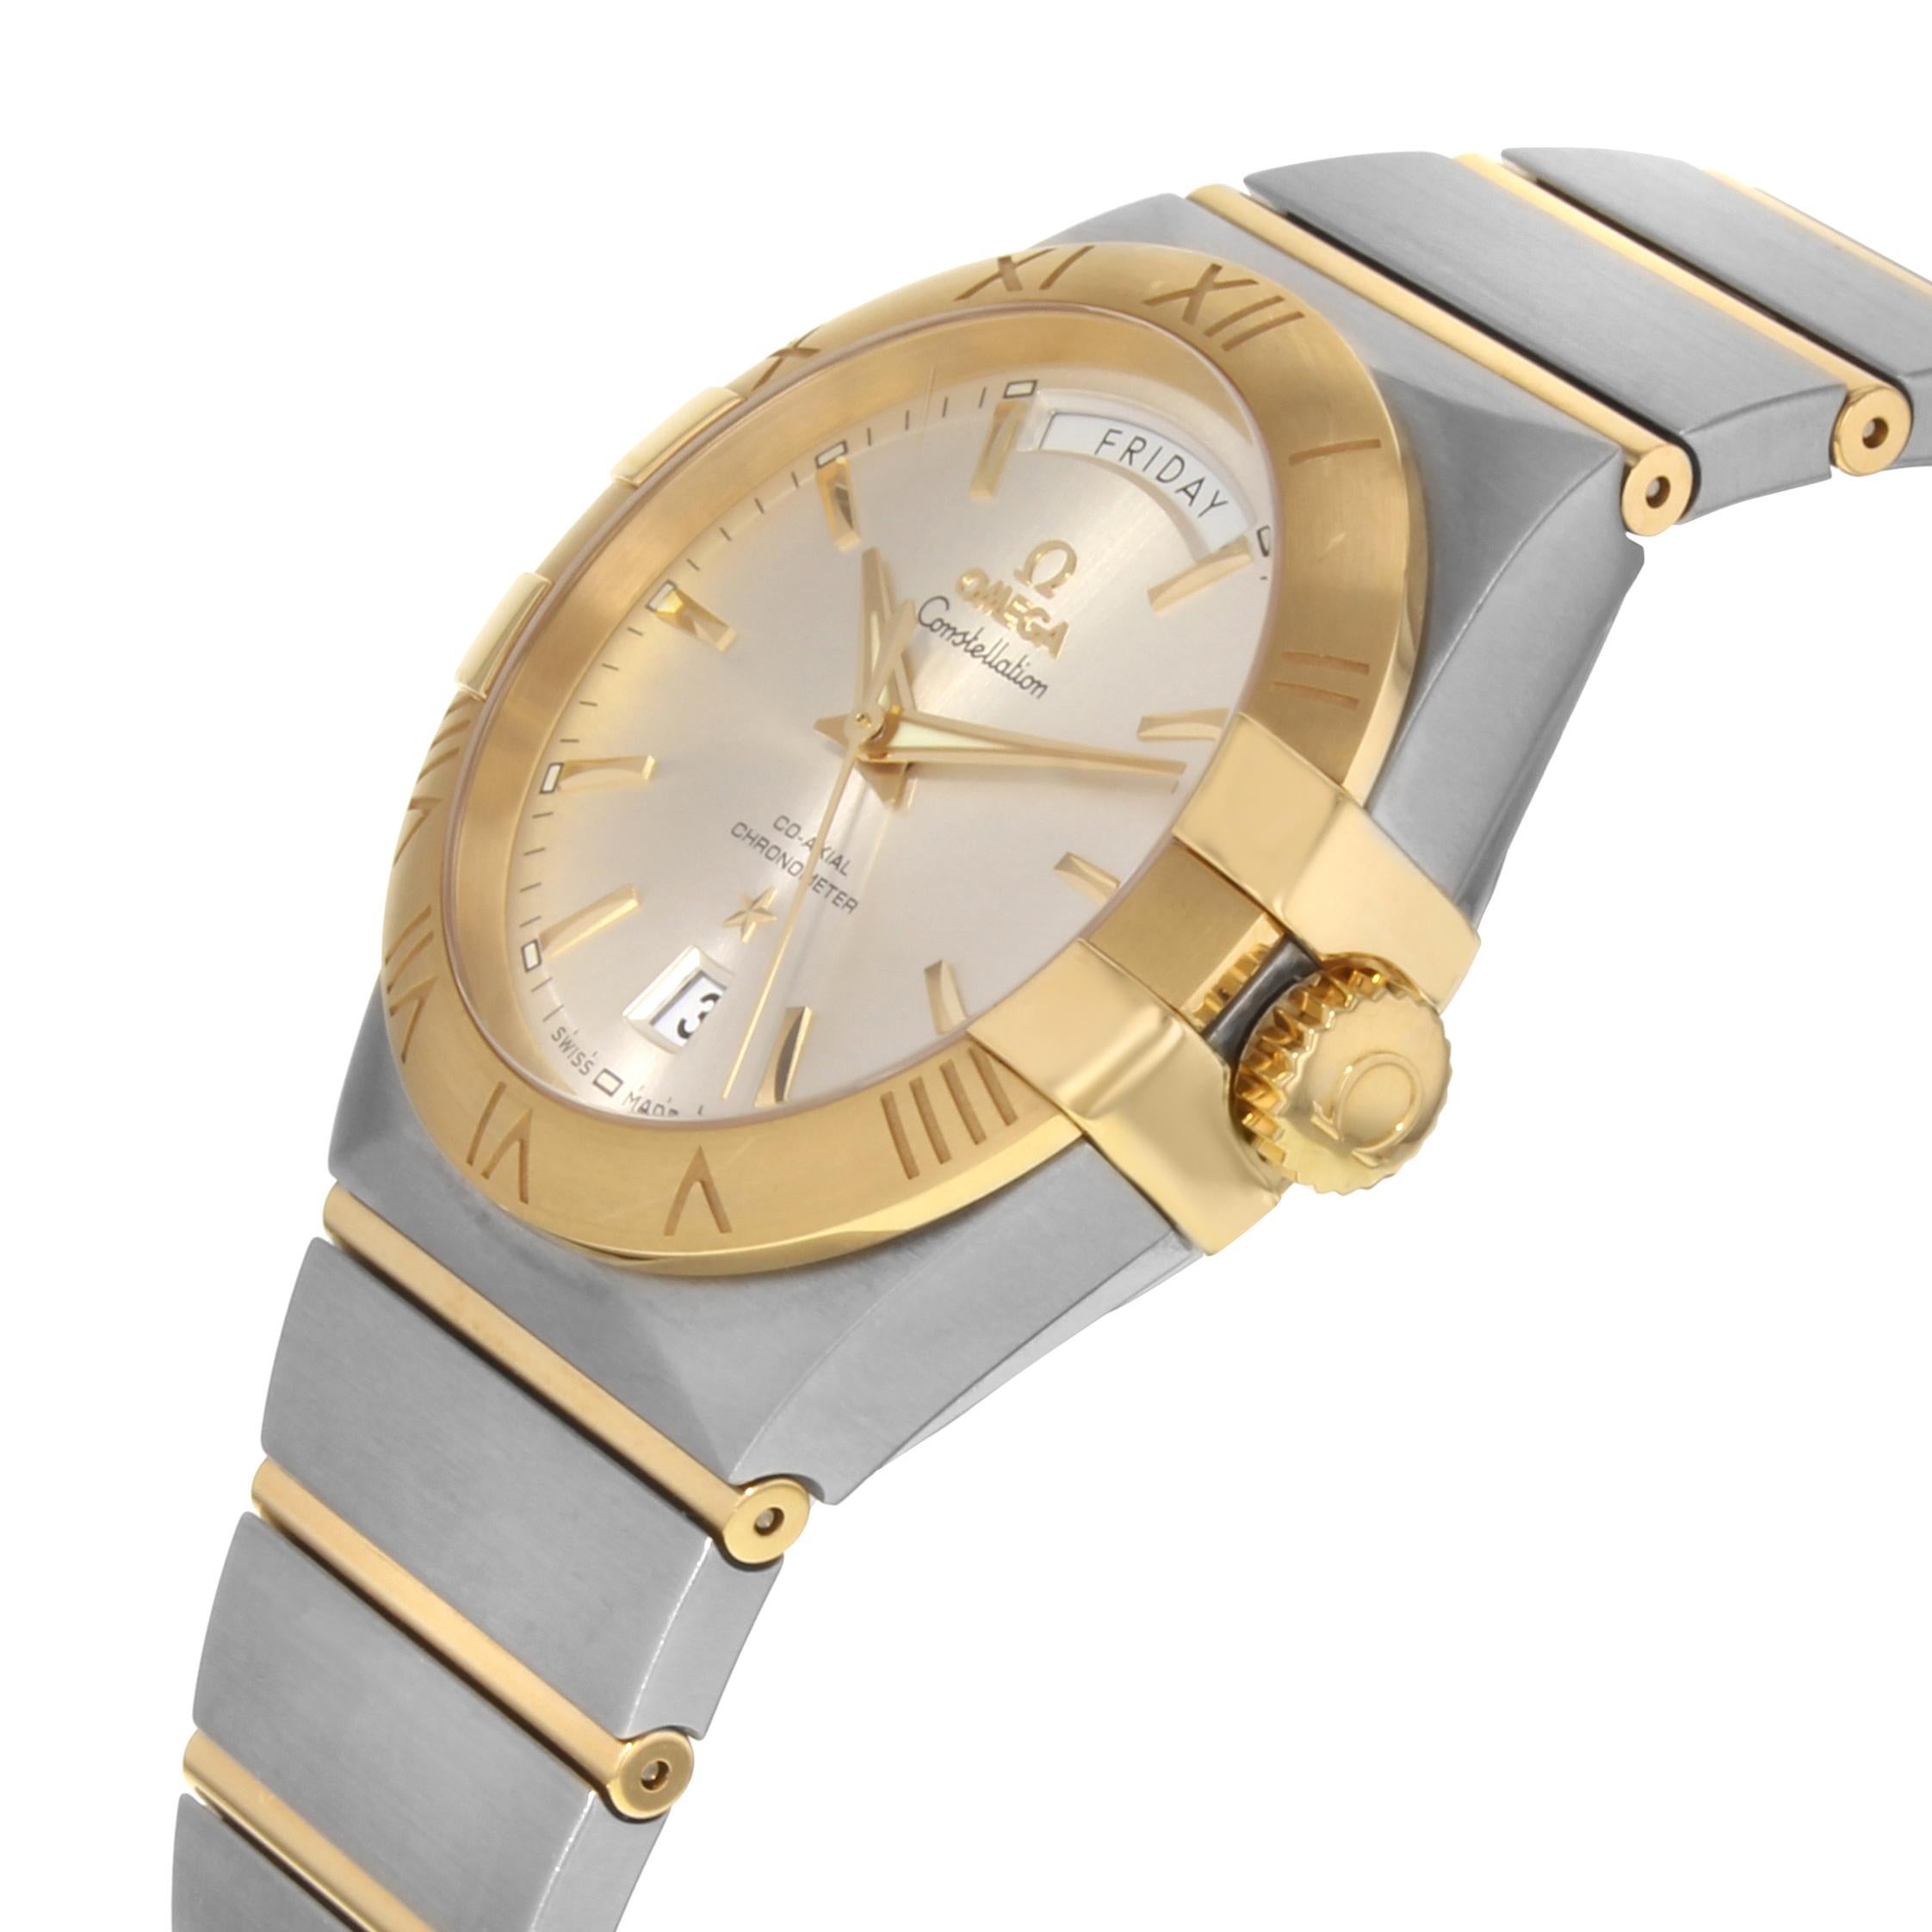 This display model Omega Constellation 123.20.38.22.02.002 is a beautiful men's timepiece that is powered by an automatic movement which is cased in a stainless steel case. It has a round shape face, day & date dial and has hand sticks style